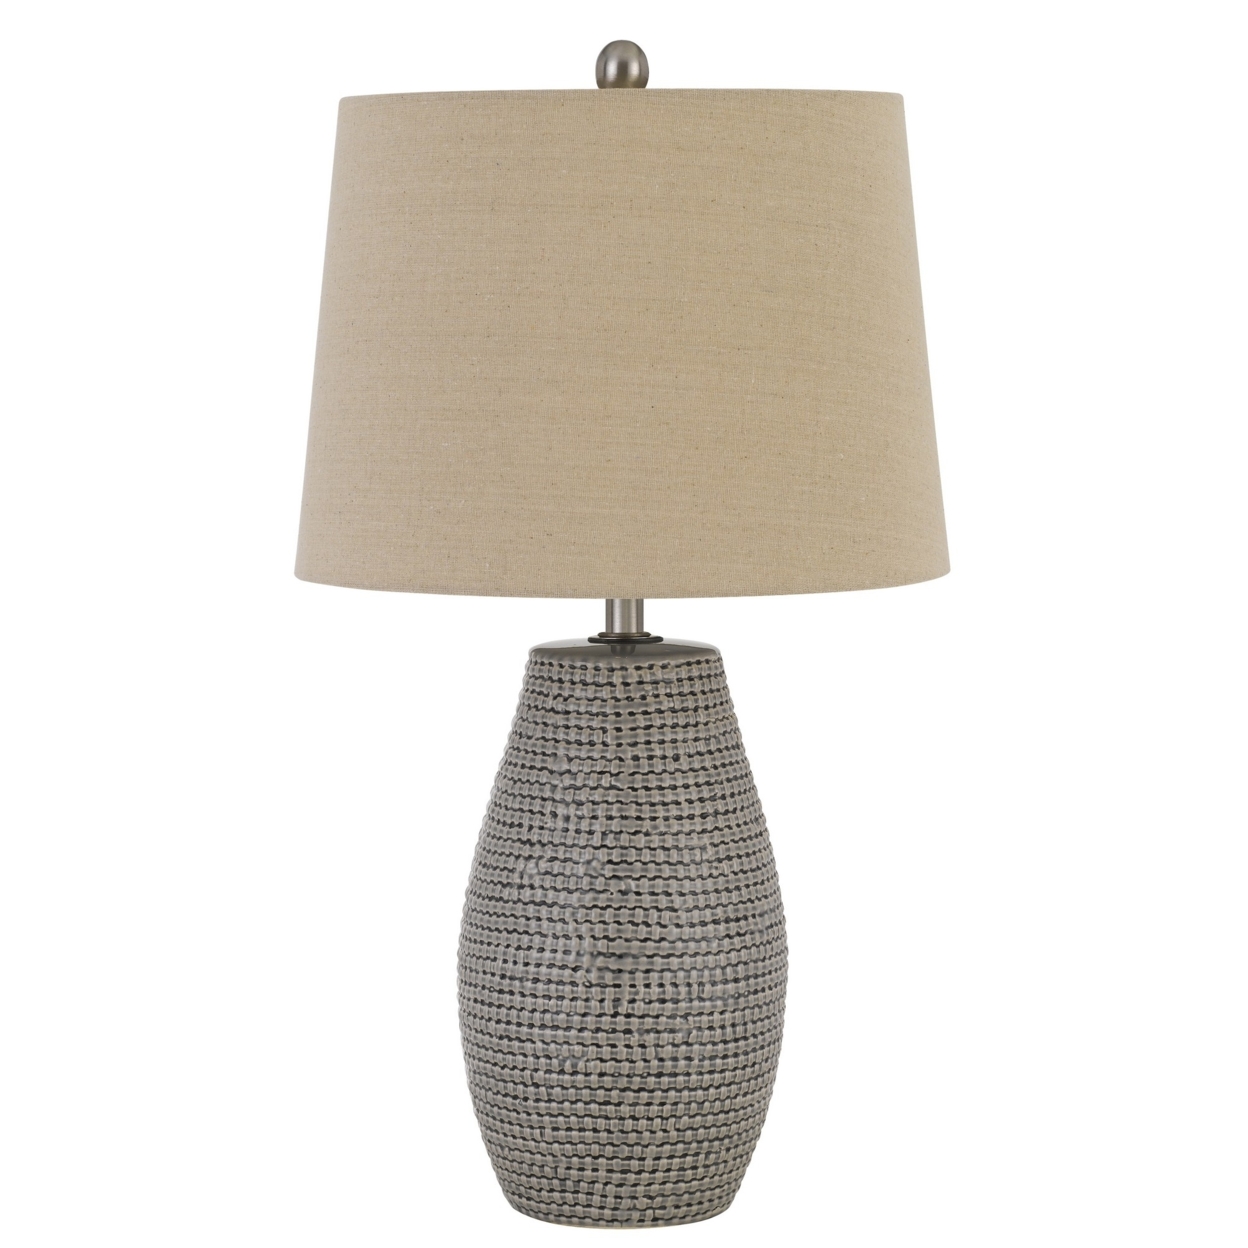 Pot Bellied Shape Ceramic Table Lamp with Textured Details, Set of 2, Gray- Saltoro Sherpi